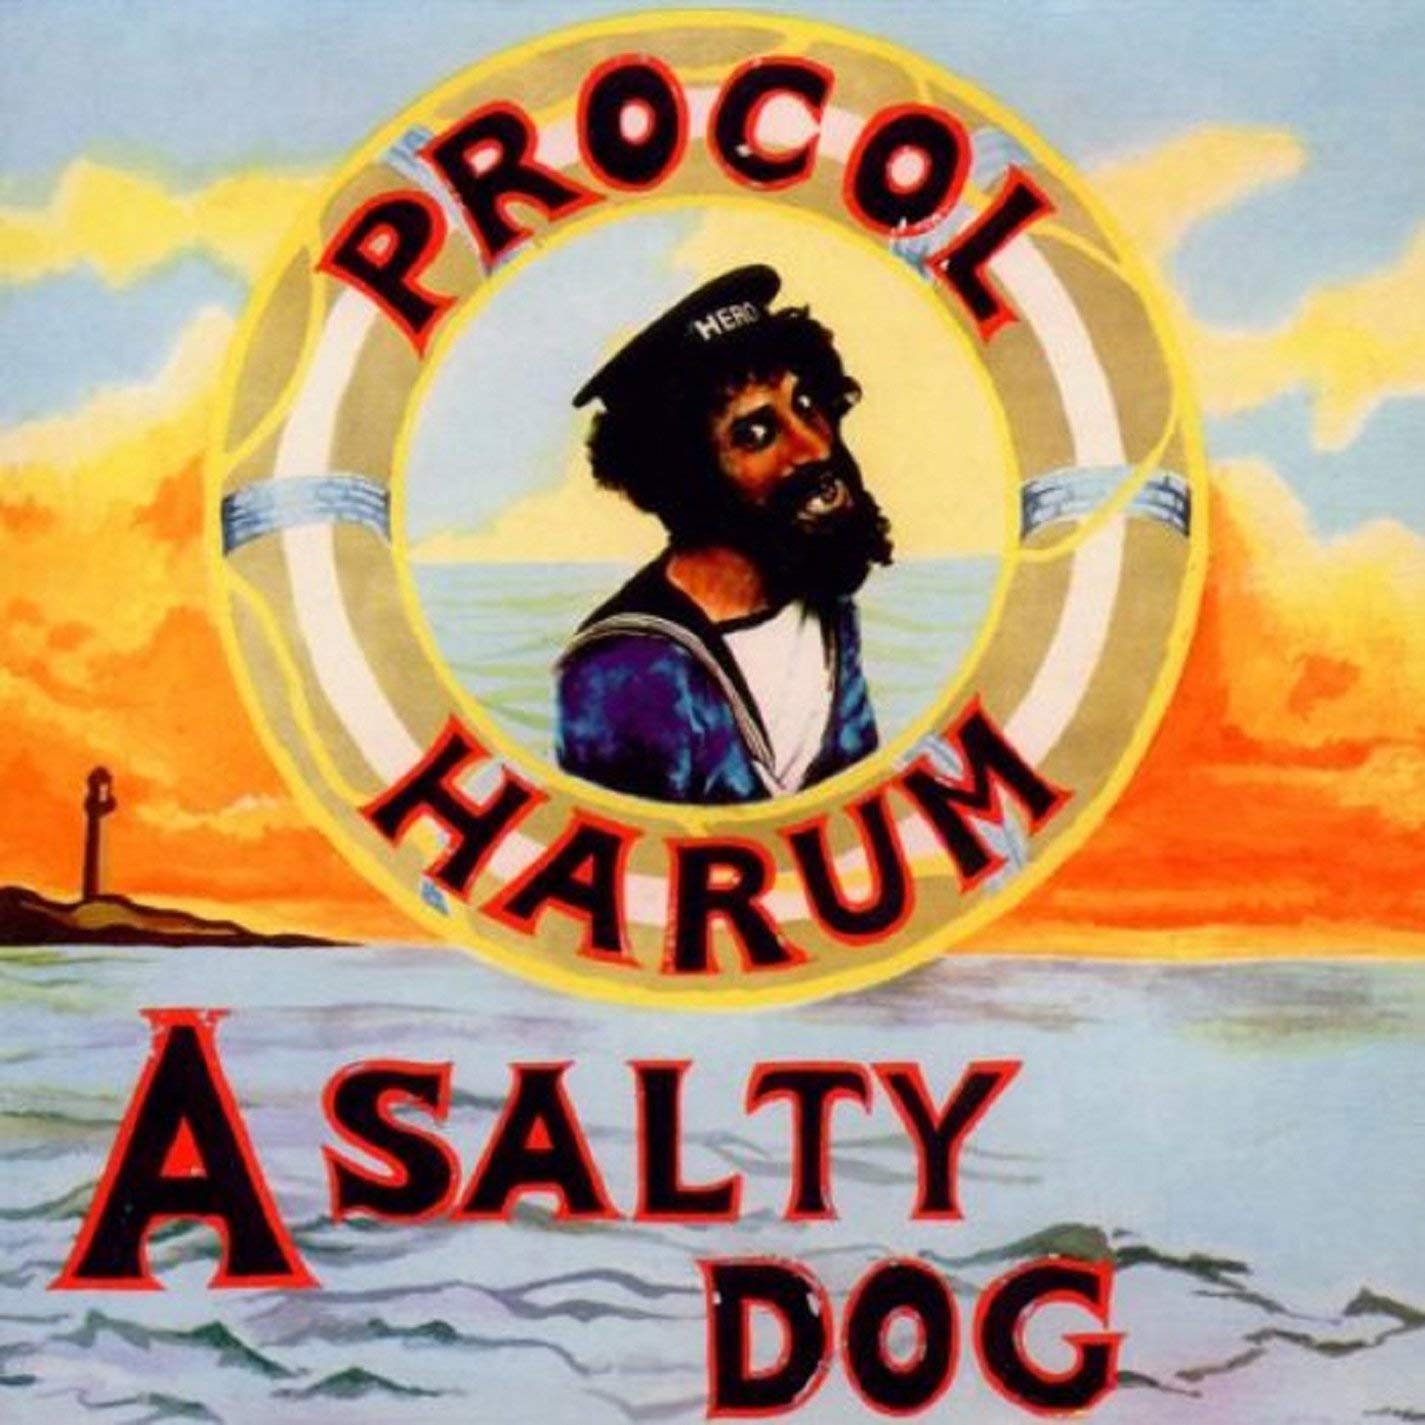 Procol Harum - A Salty Dog Expanded - 2CD